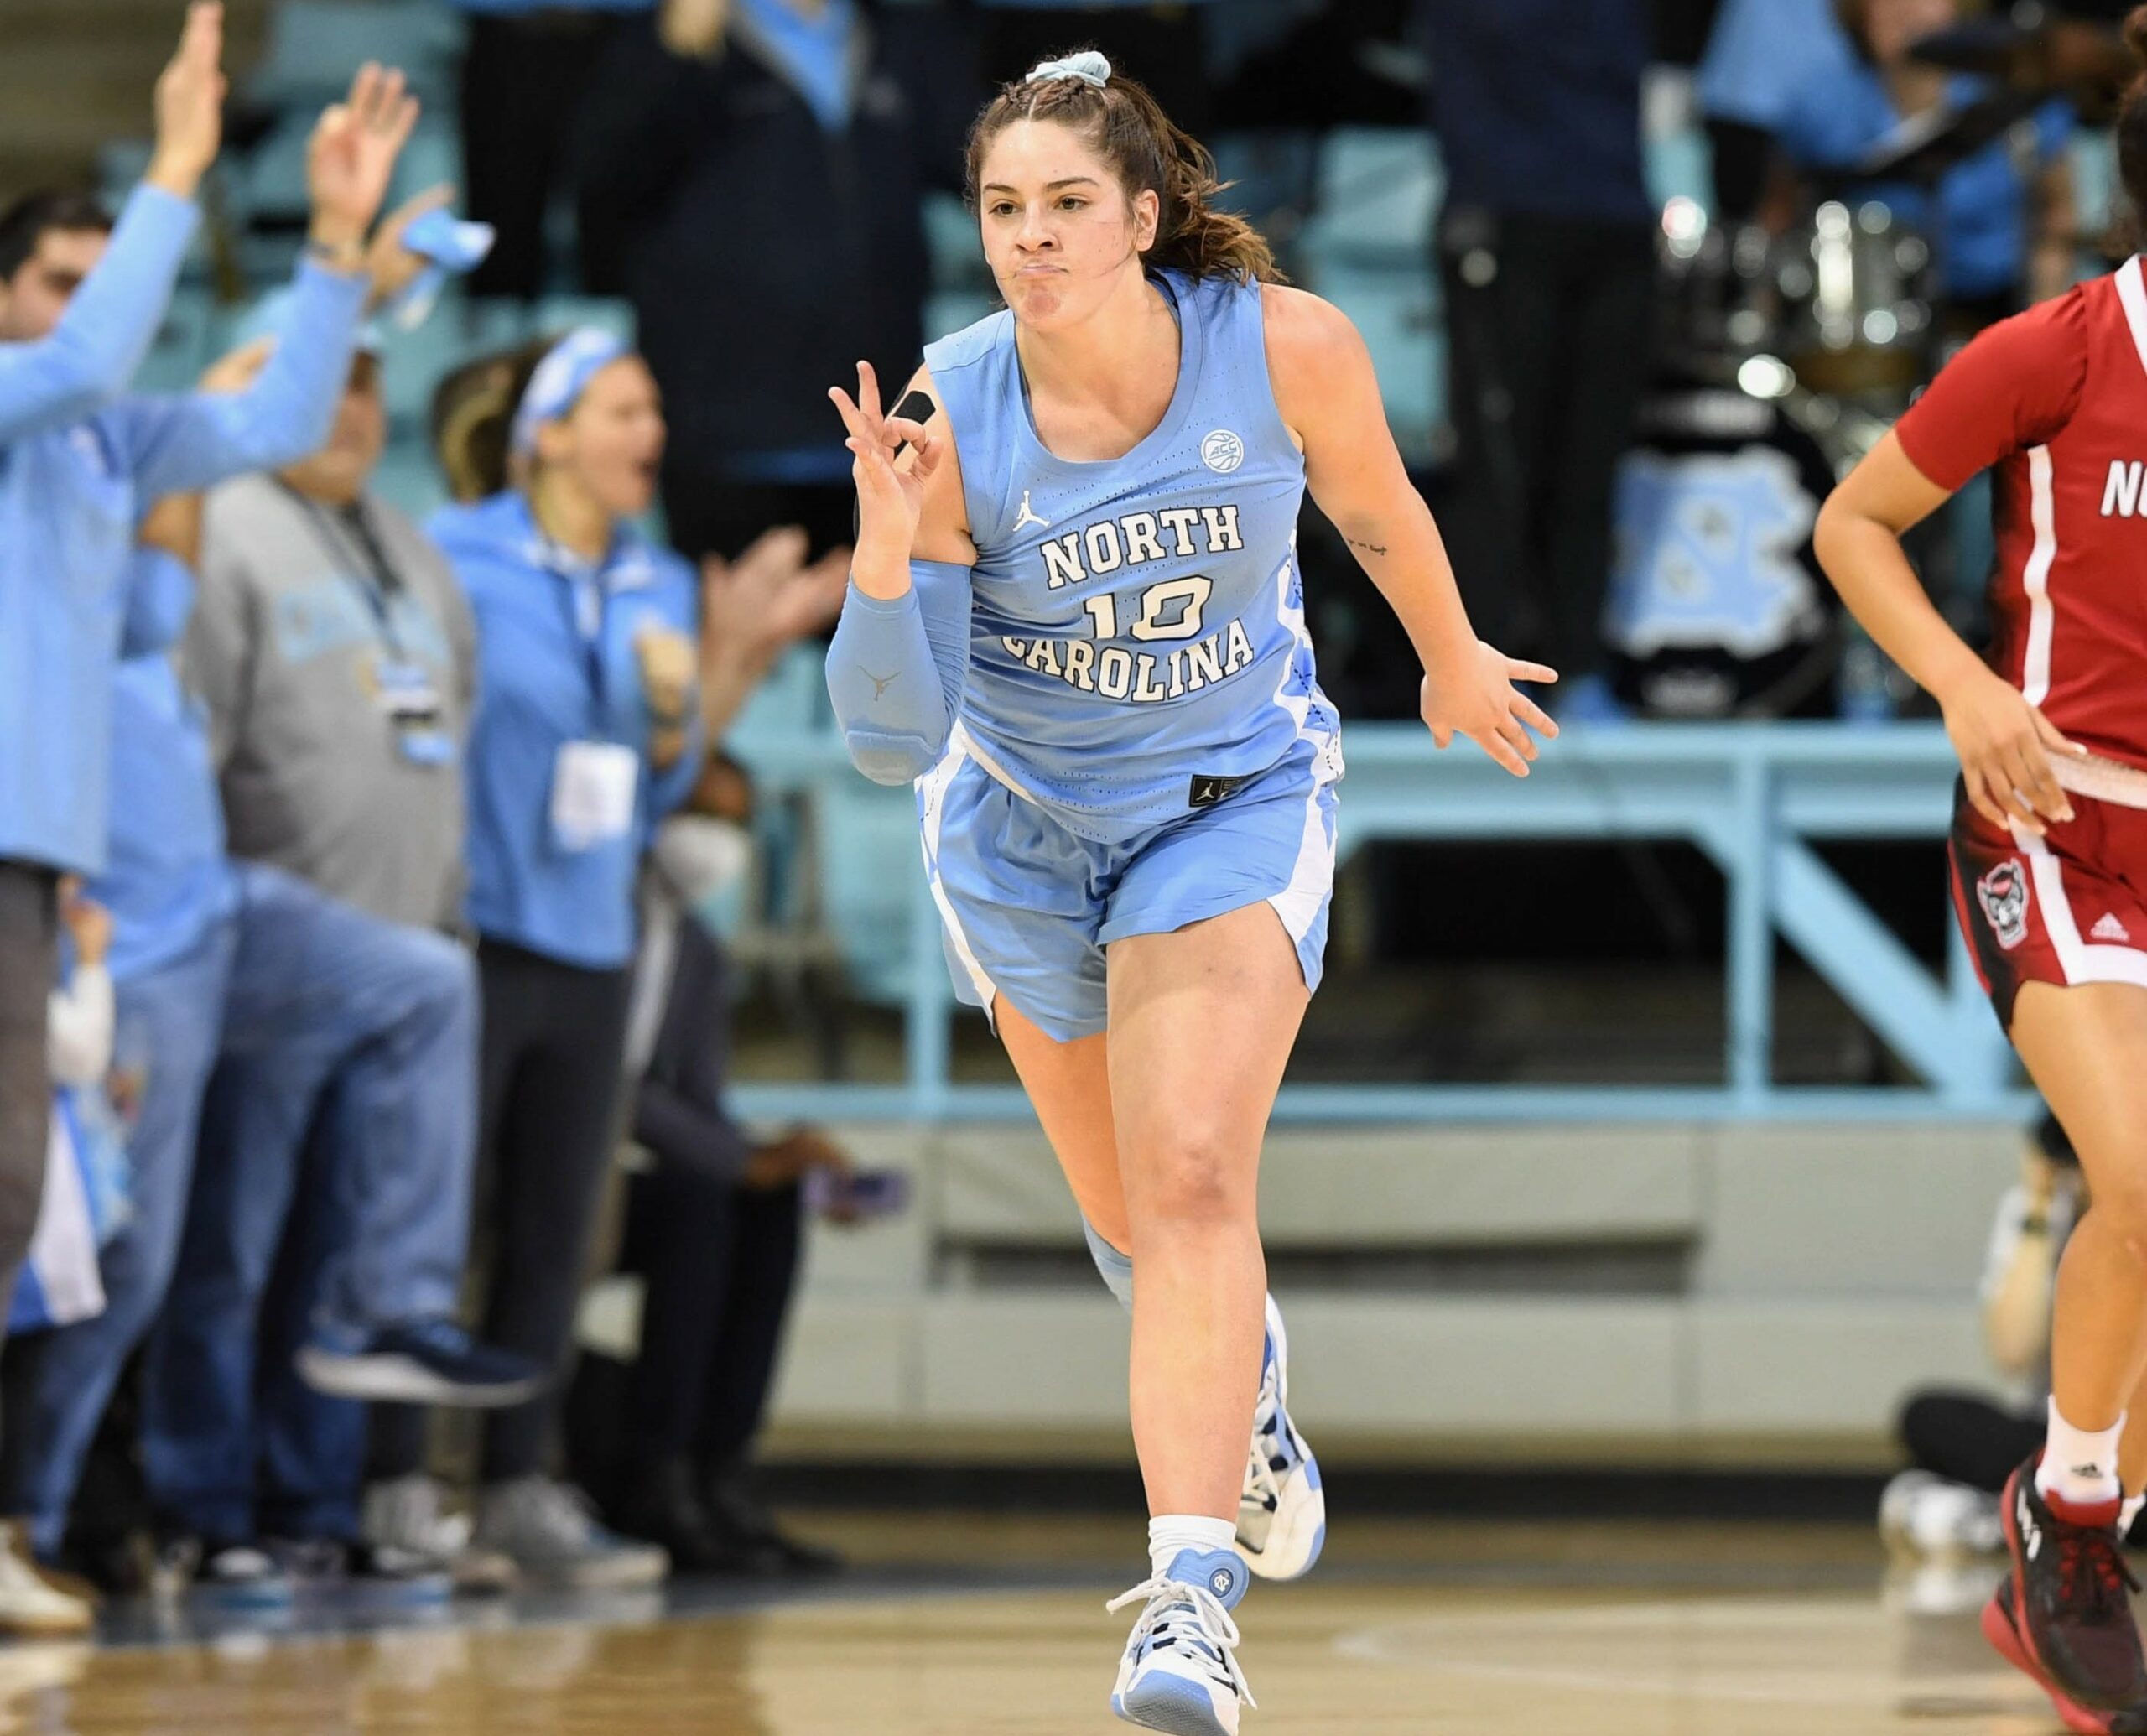 UNC Women’s Basketball Tops No. 11 NC State; Fourth Ranked Win this Season